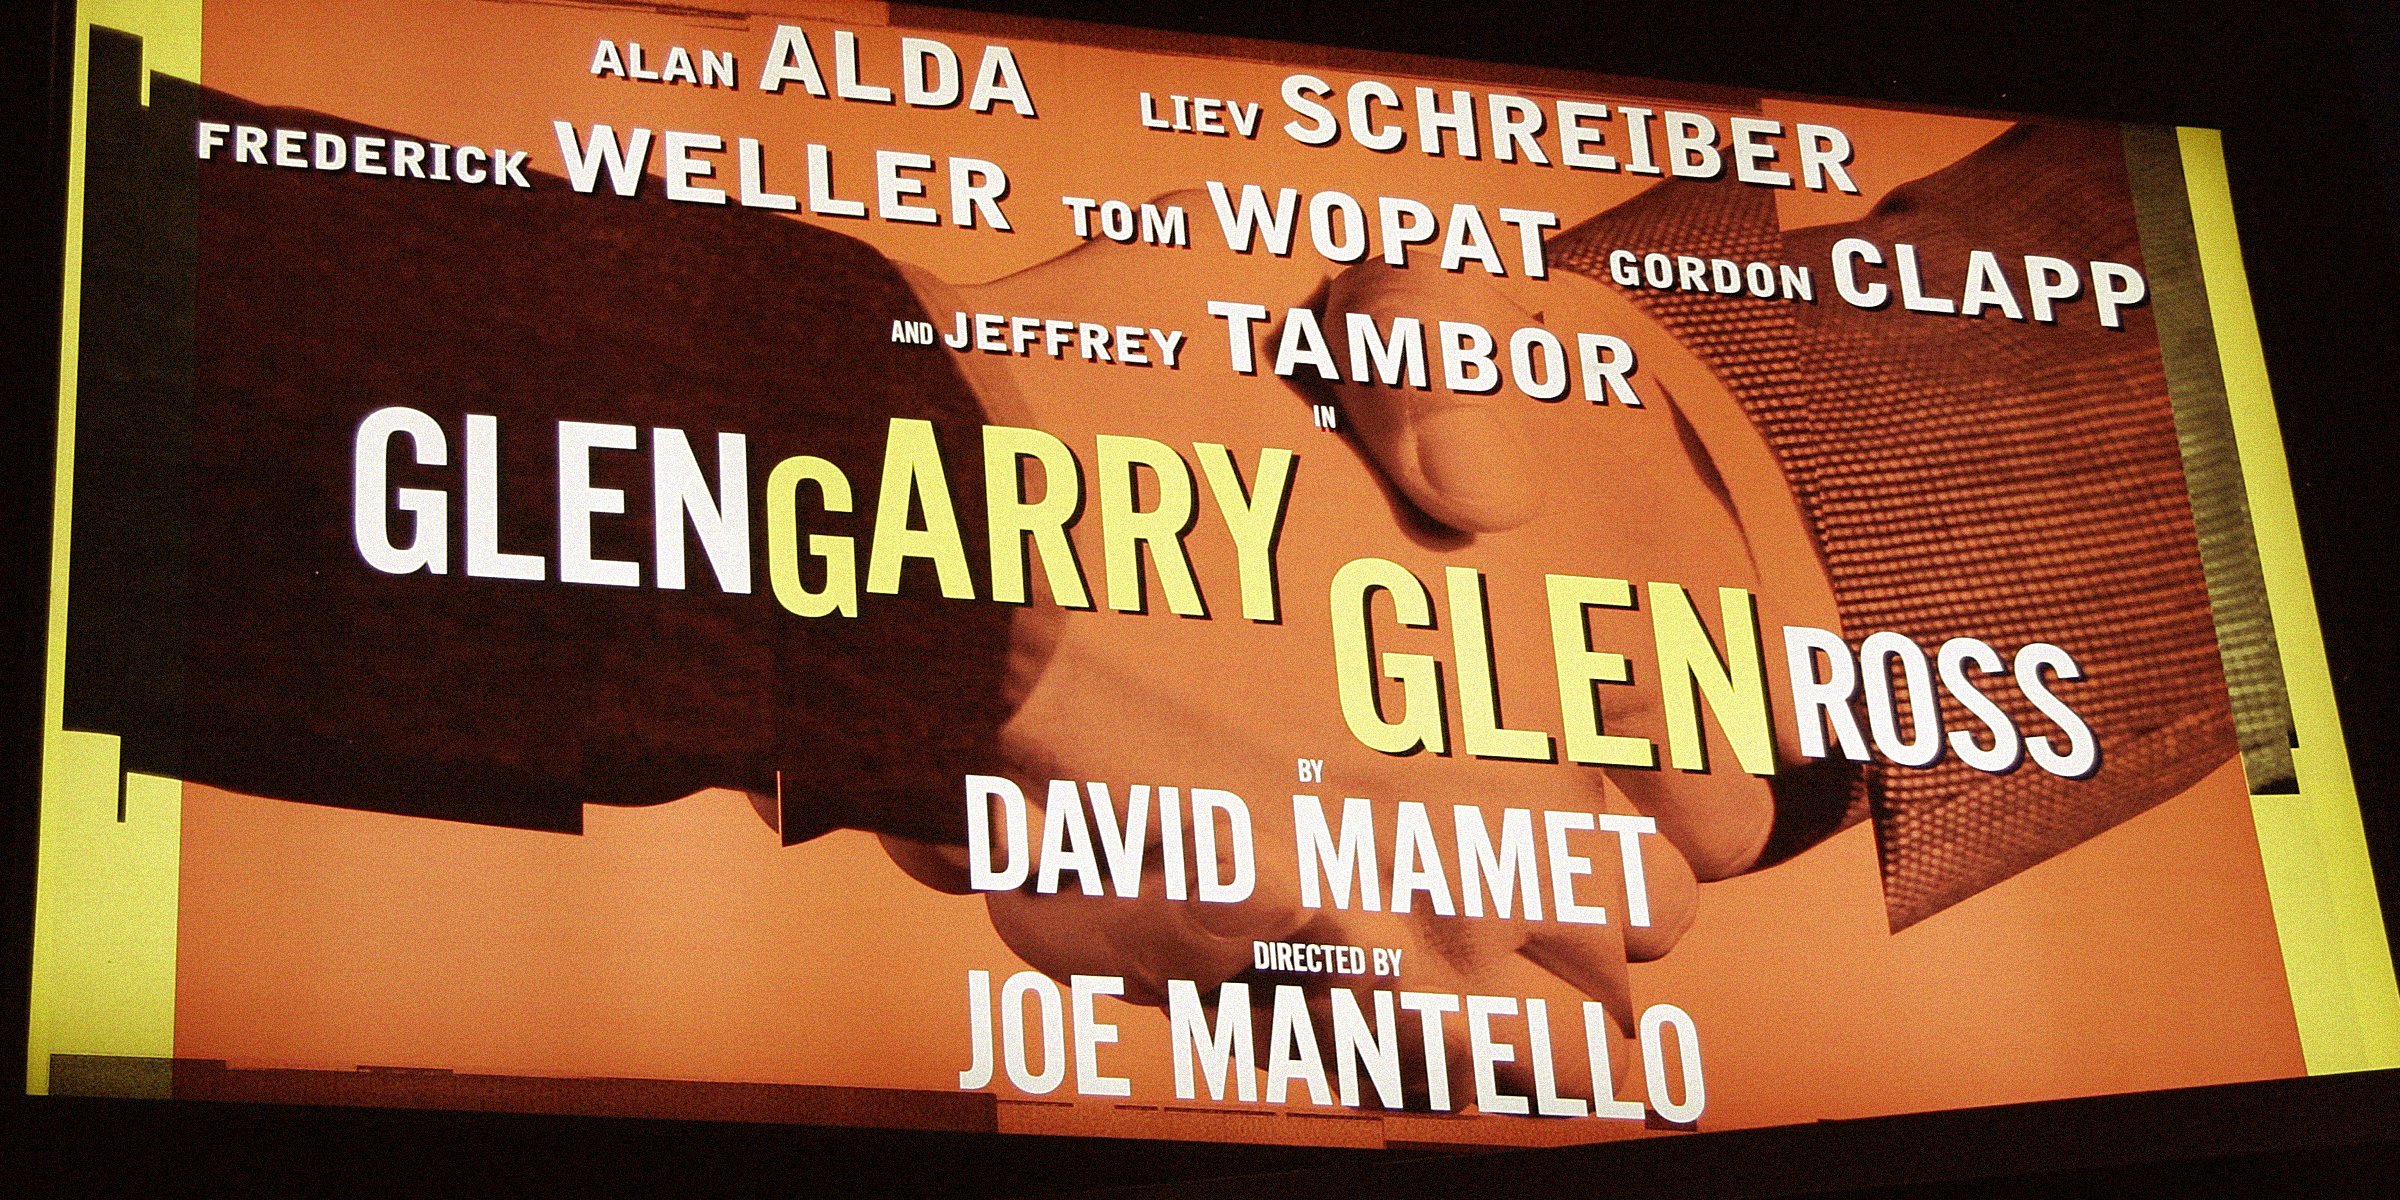 An advertisement for 'Glengarry Glen Ross' | Source: Getty Images